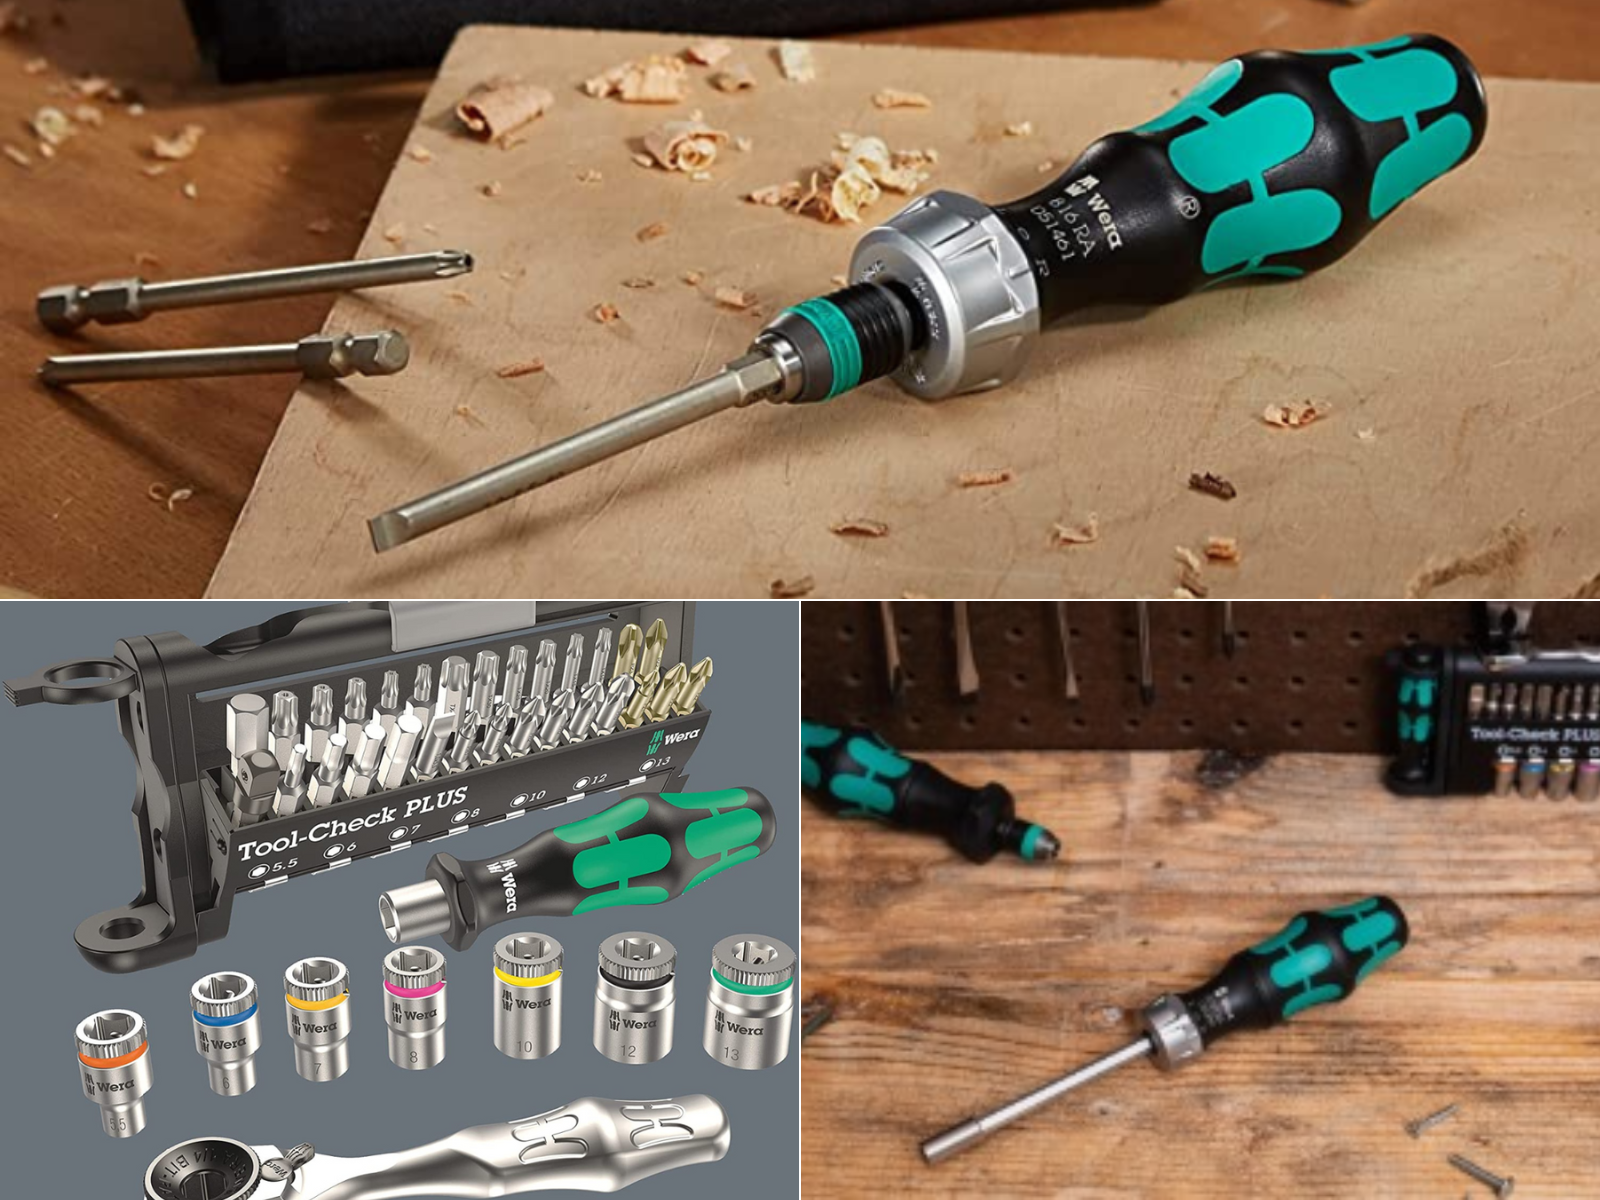 Wera screwdrivers that ratchet shown with companion bits and sockets in one set.